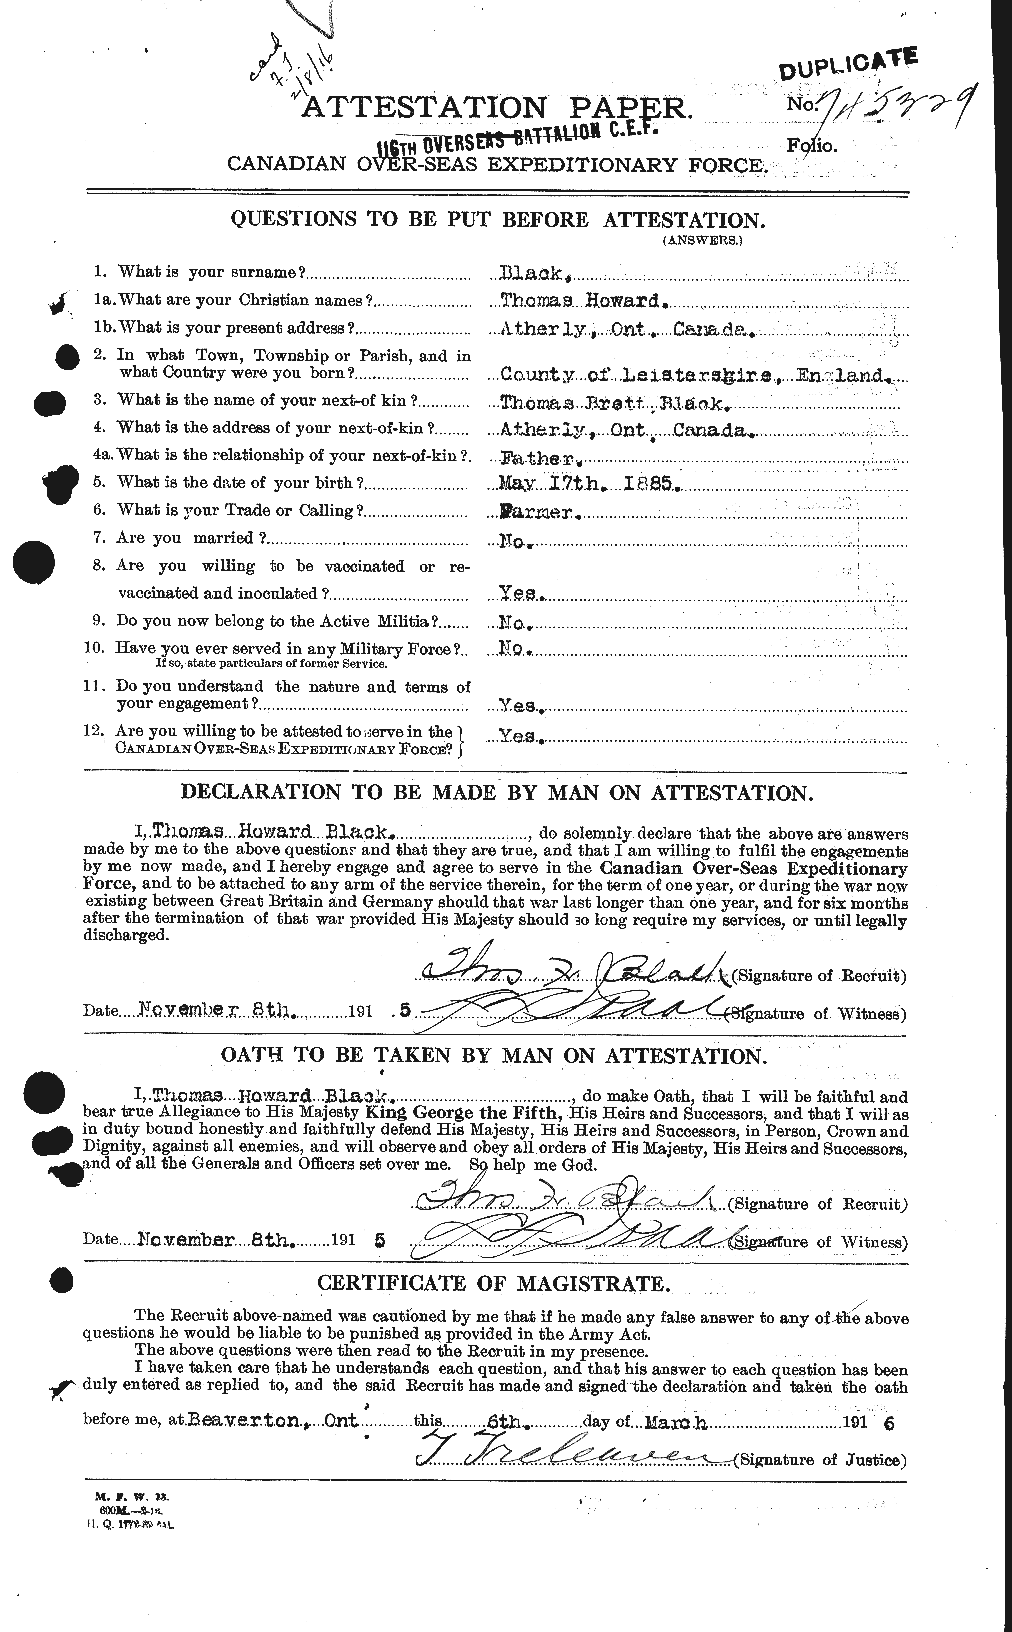 Personnel Records of the First World War - CEF 247634a